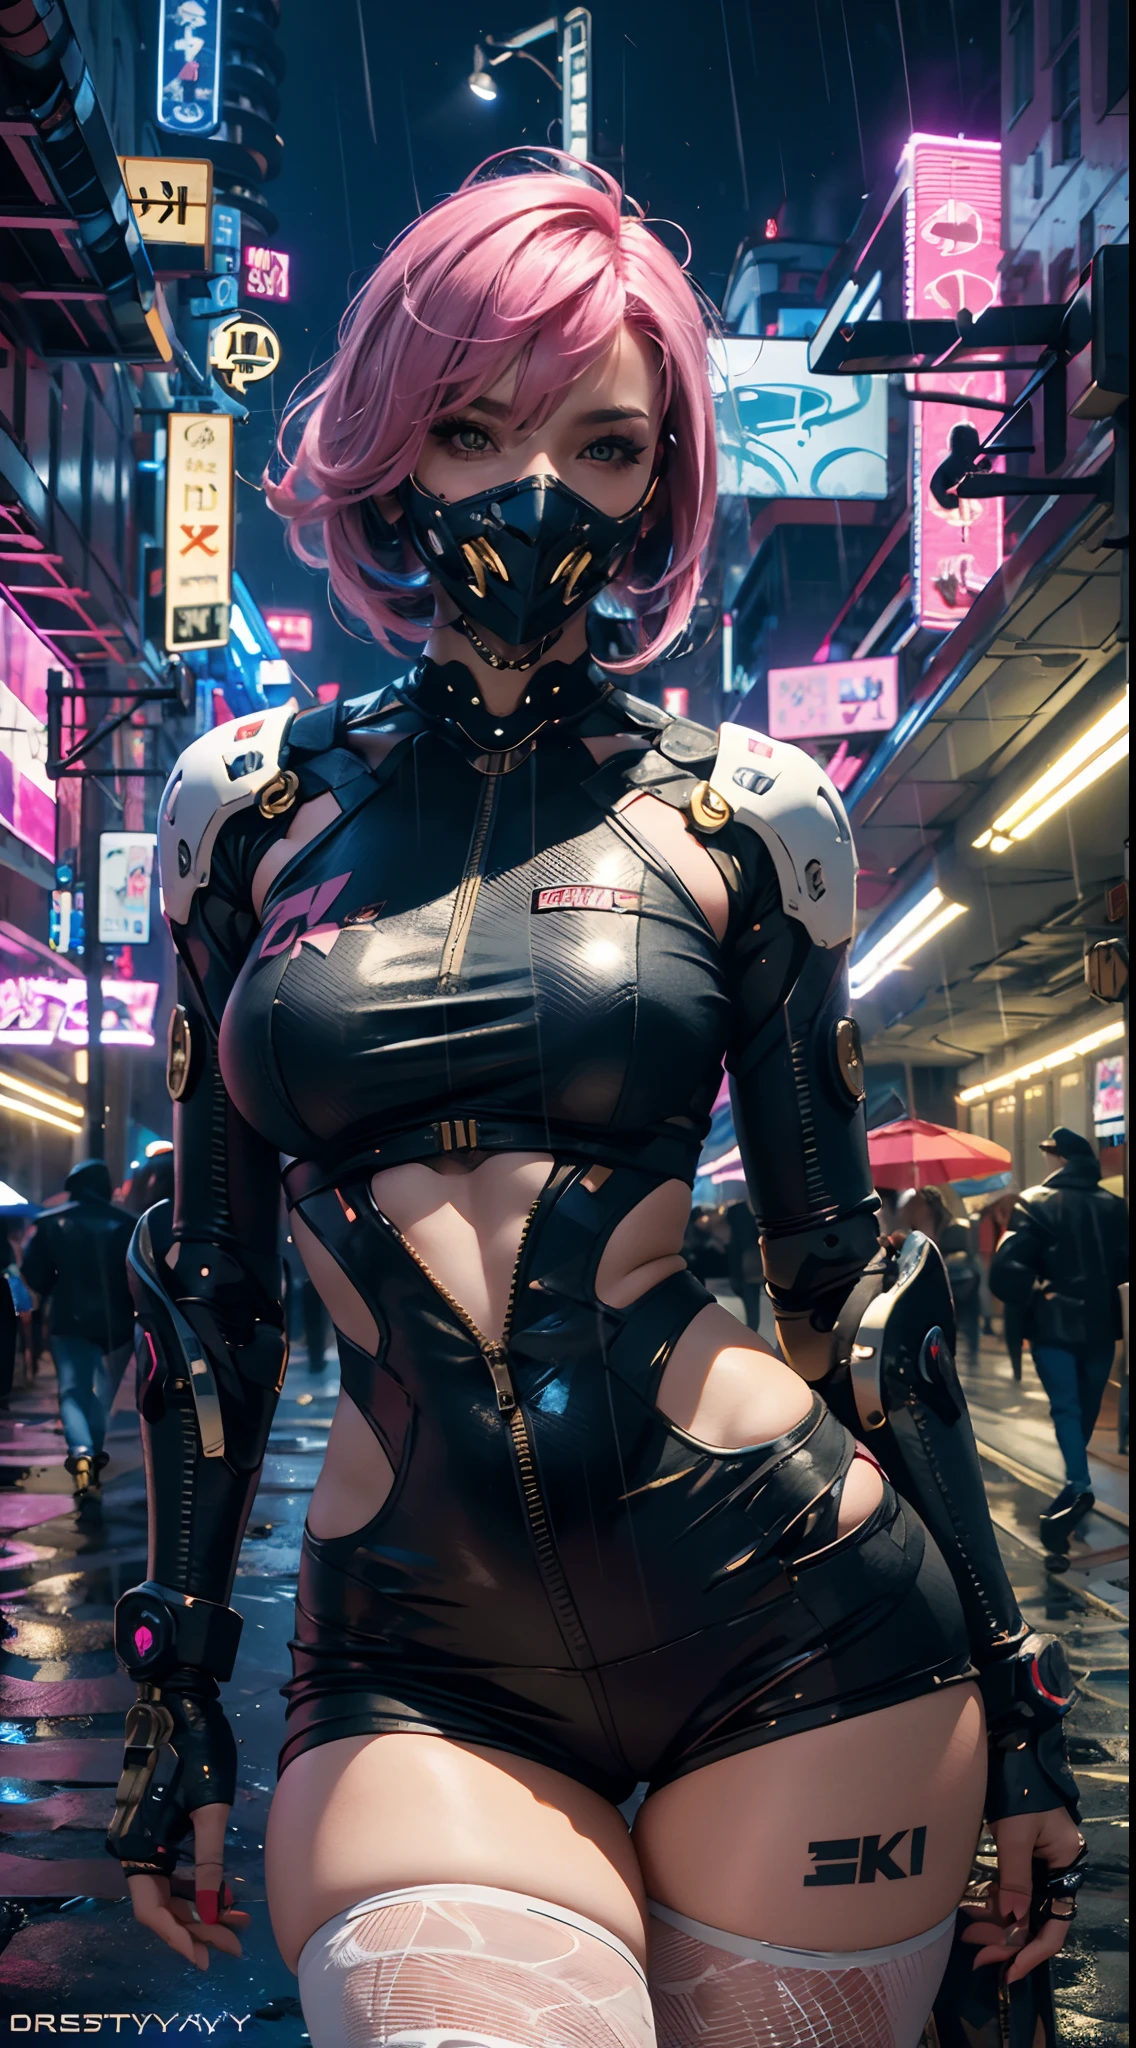 masterpiece, maximum quality, ultra high resolution, 8k, a girl,beauty,21years old,fair skin, extremely beautiful,strong gaze, alone,bust portrait,cyberpunk outfit, extremely detailed face, detailed eyes, mischievous smile, cheerful, realistic photo, totally realistic, human pelle, studio lighting,golden ratio body, wide hips,perfect legs, big ass,pink hair,blunt bangs,blue and white clothing,D-cup breasts,in the cyberpunk city,cyberpunk city background,((night)),rain,tattoos,Combat posture,cyborg,Mechanical mask